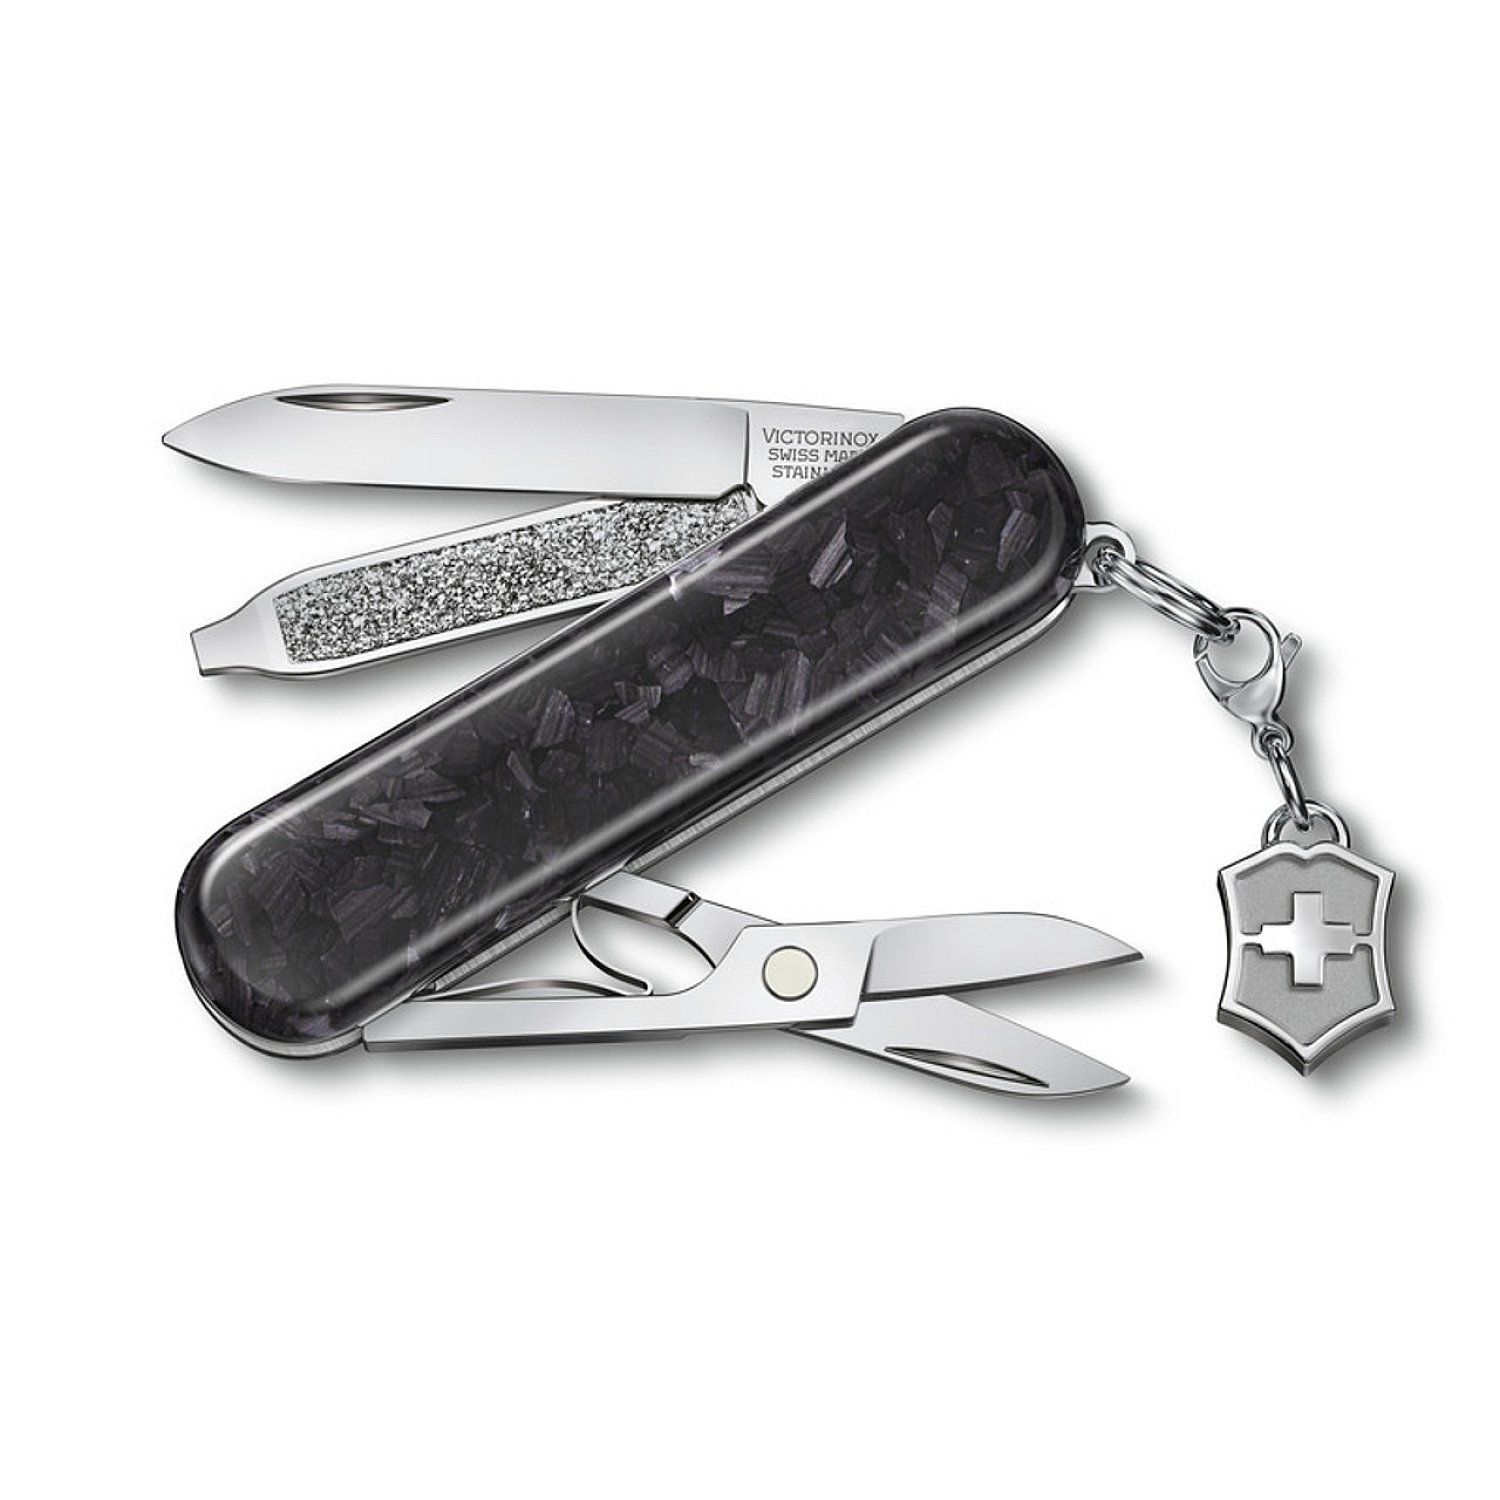 Victorinox Classic SD Swiss Army Knife - Limited Edition by